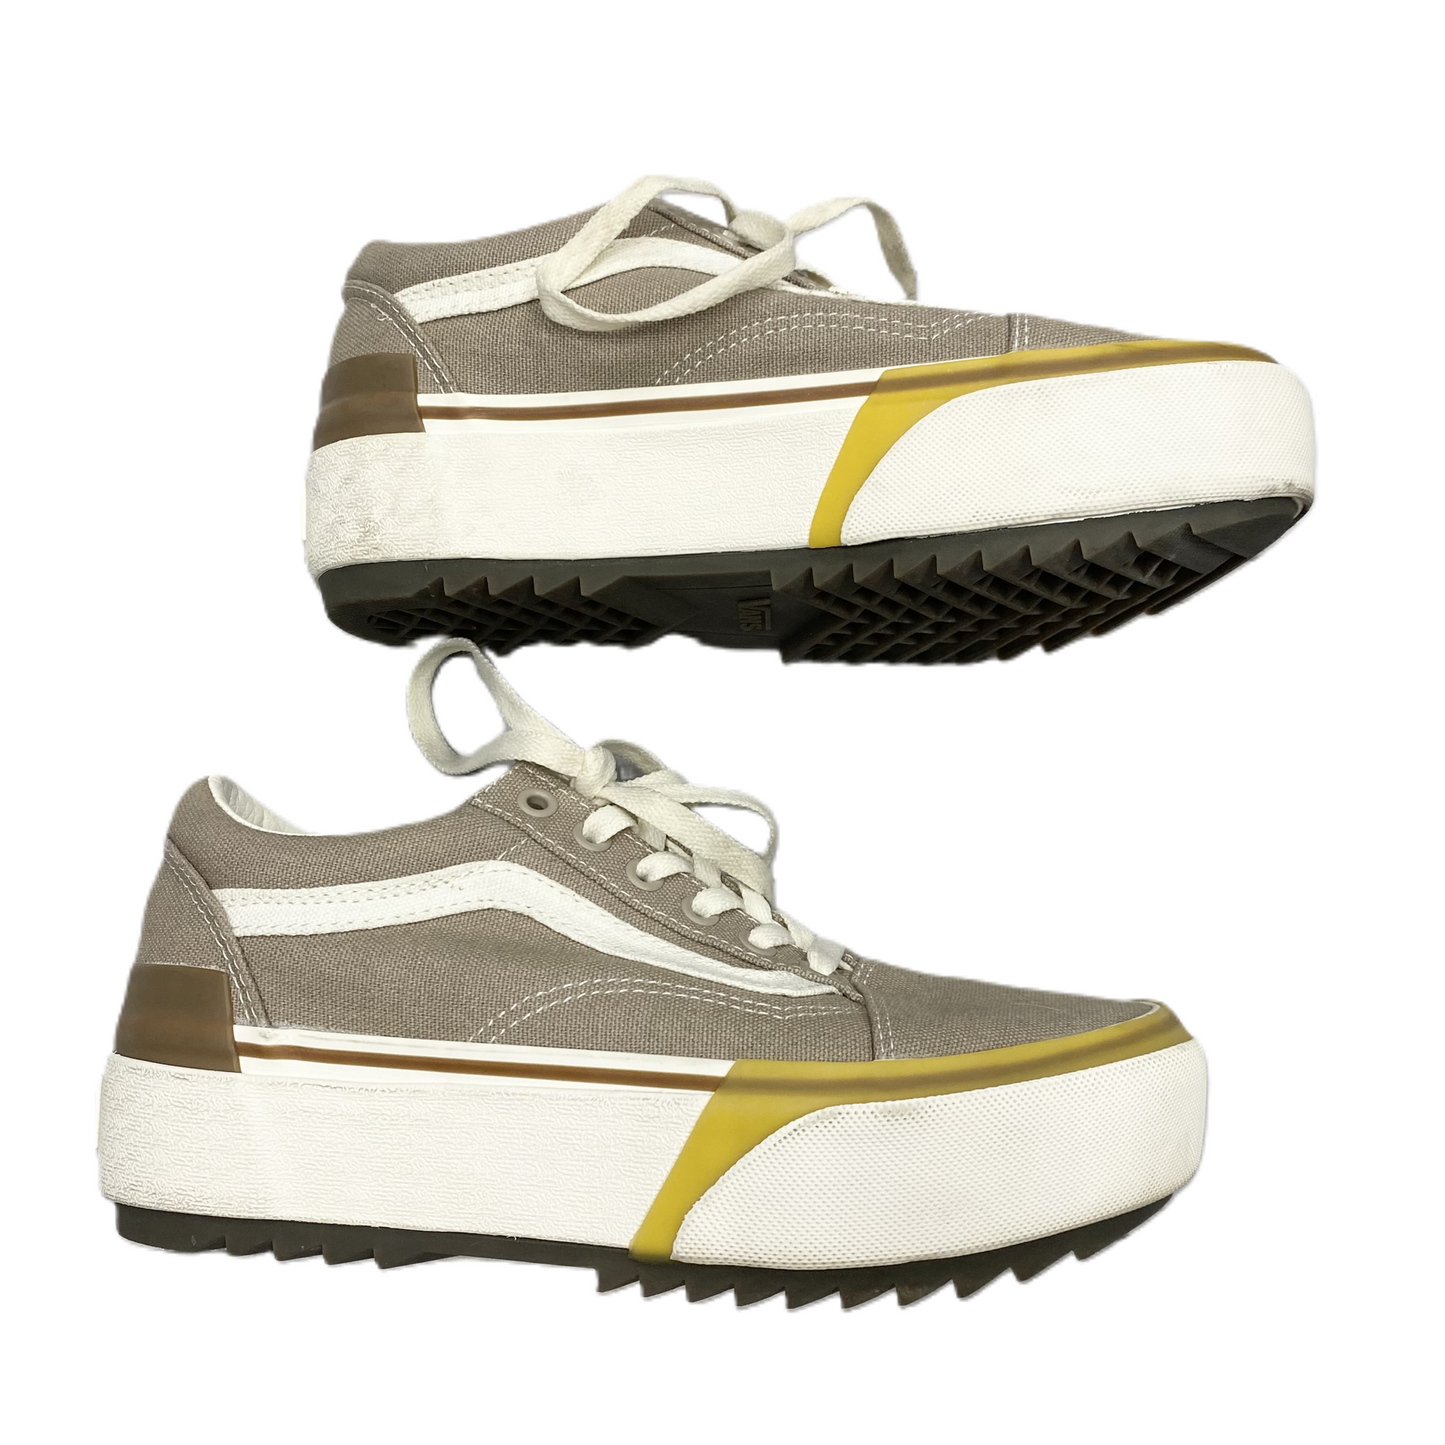 Grey & Yellow Shoes Sneakers By Vans, Size: 7